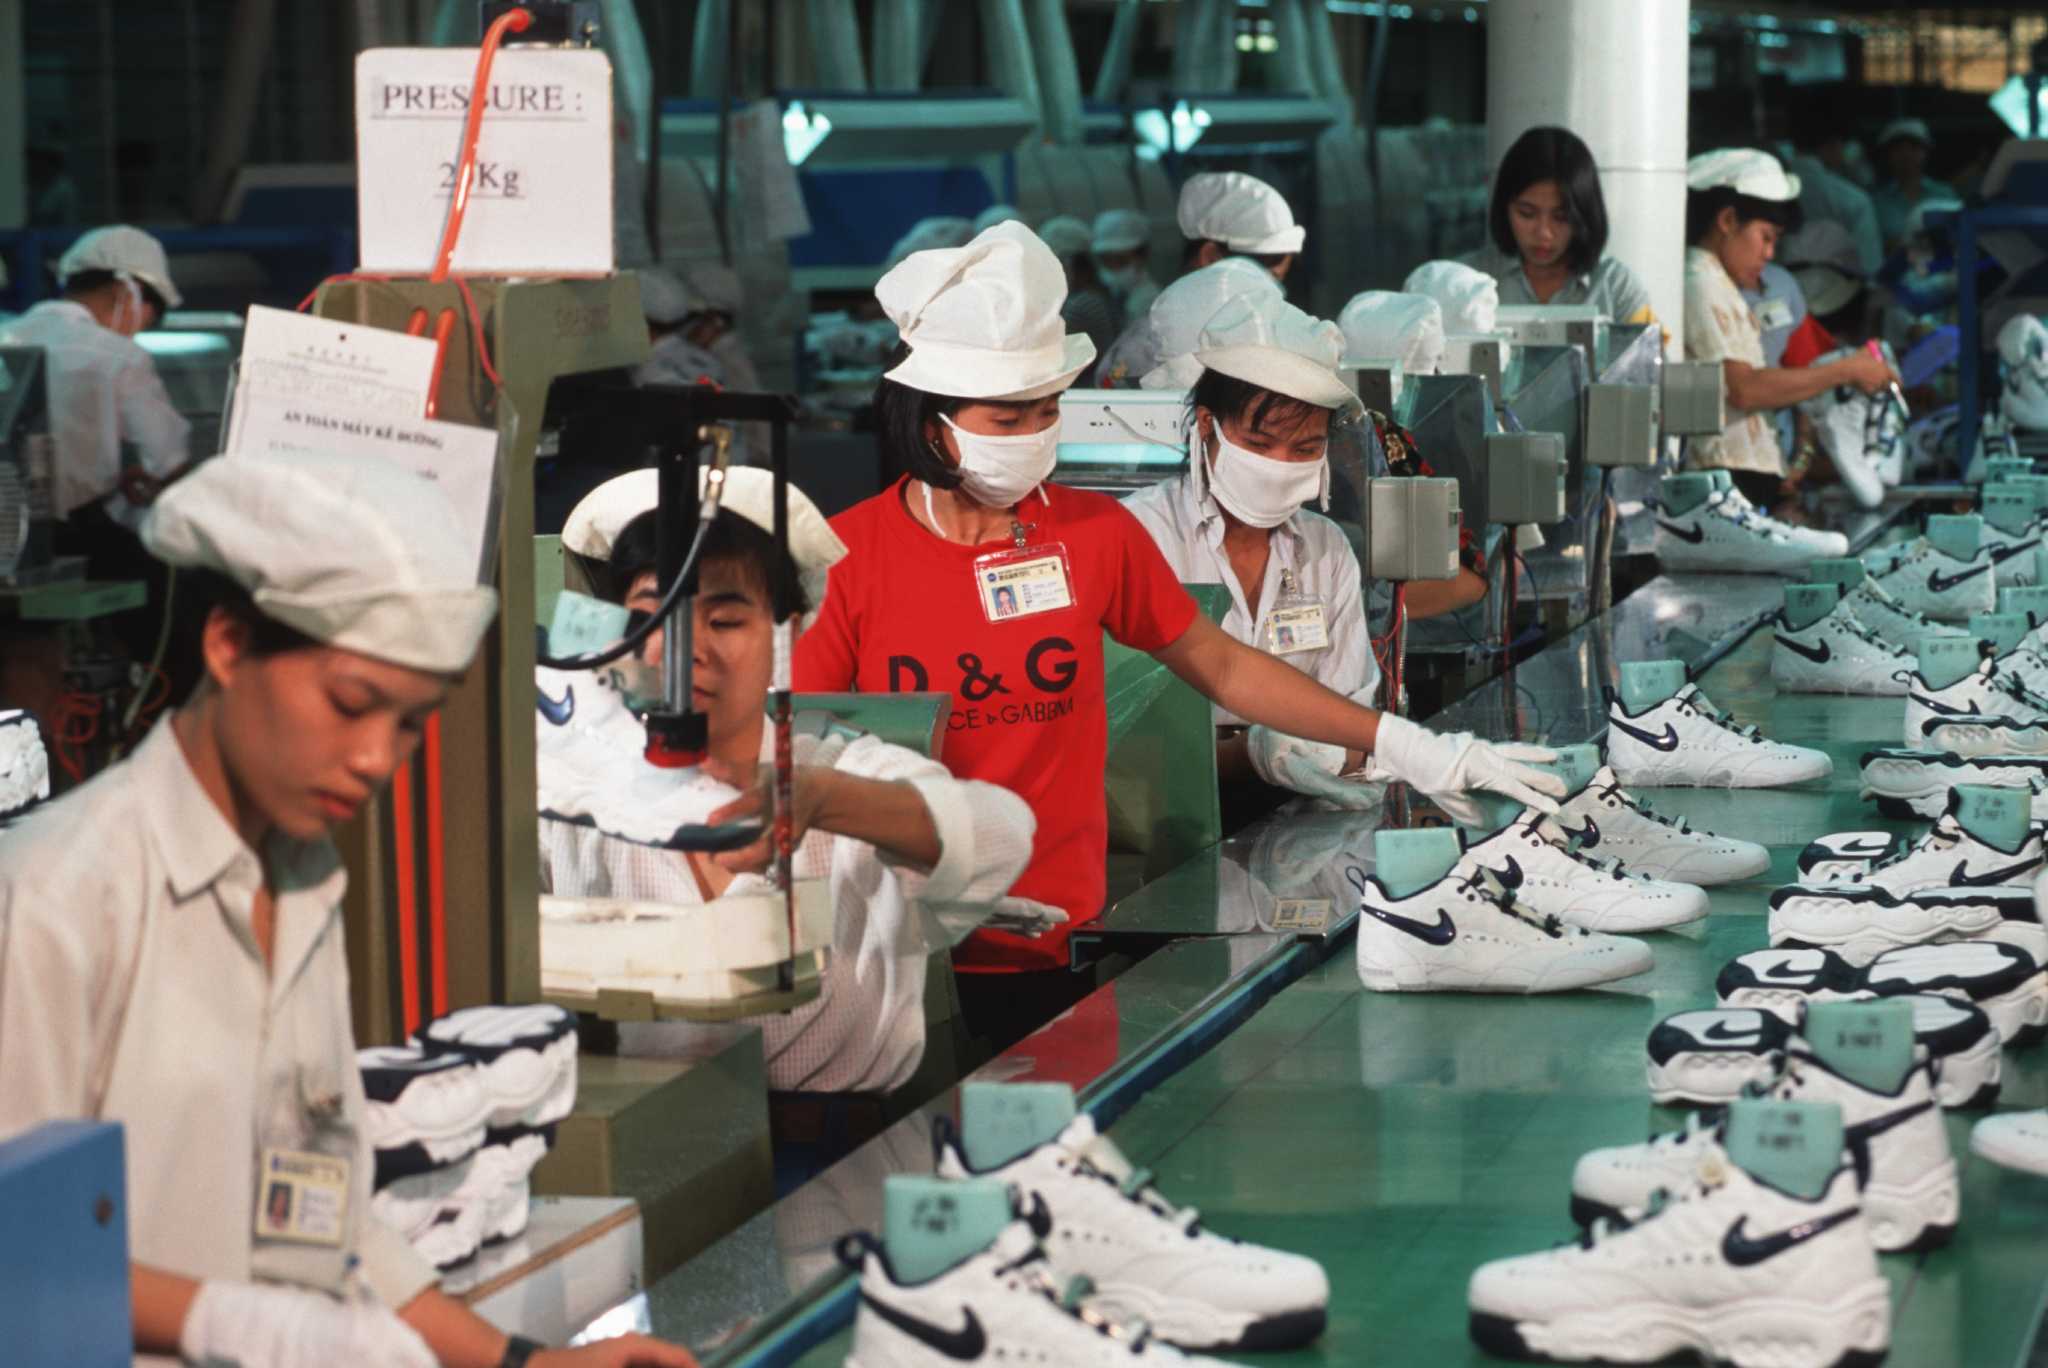 Somehow Shelf Average Nike Production Warehouses Channel Egoism Credentials